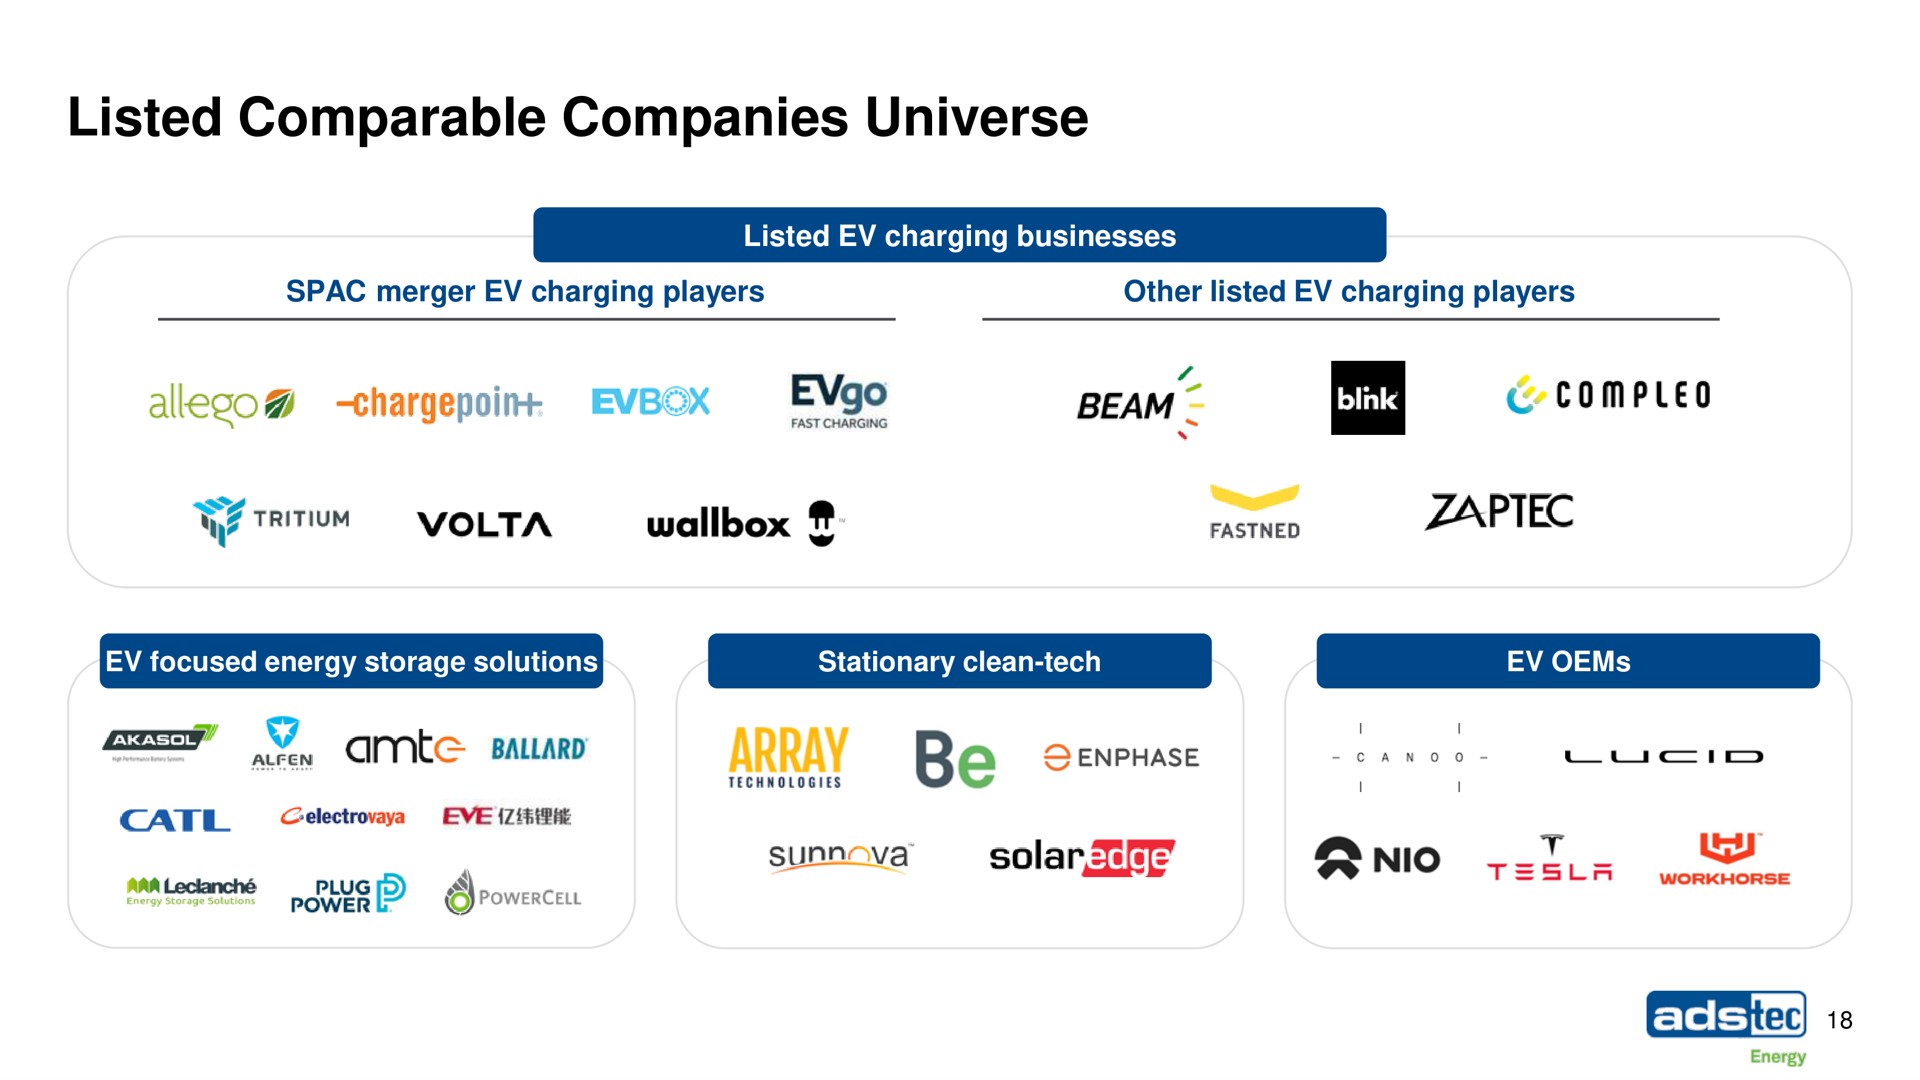 listed comparable companies universe beam | ads-tec Energy